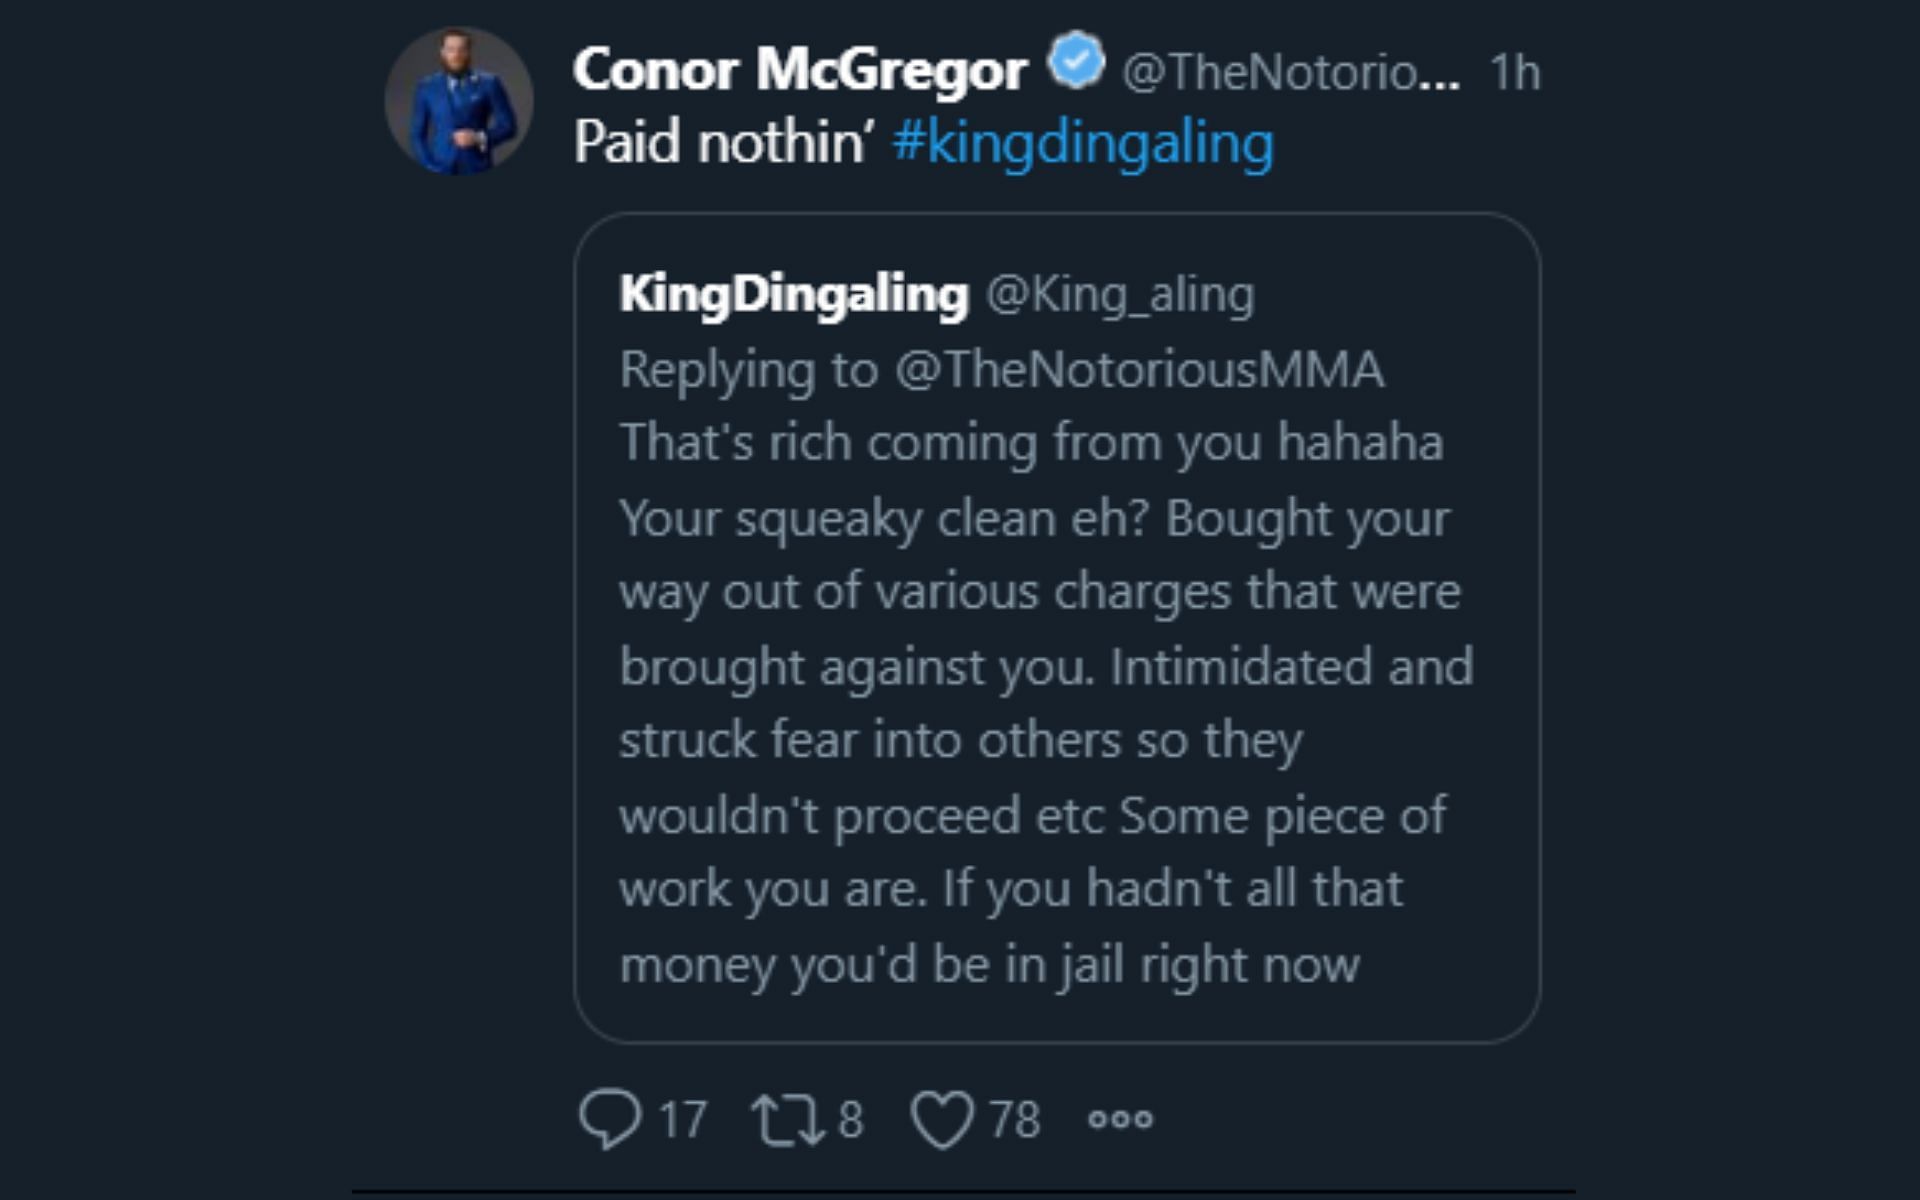 Conor McGregor's reply to @King_aling [Image courtesy: @TheNotoriousMMA Twitter]